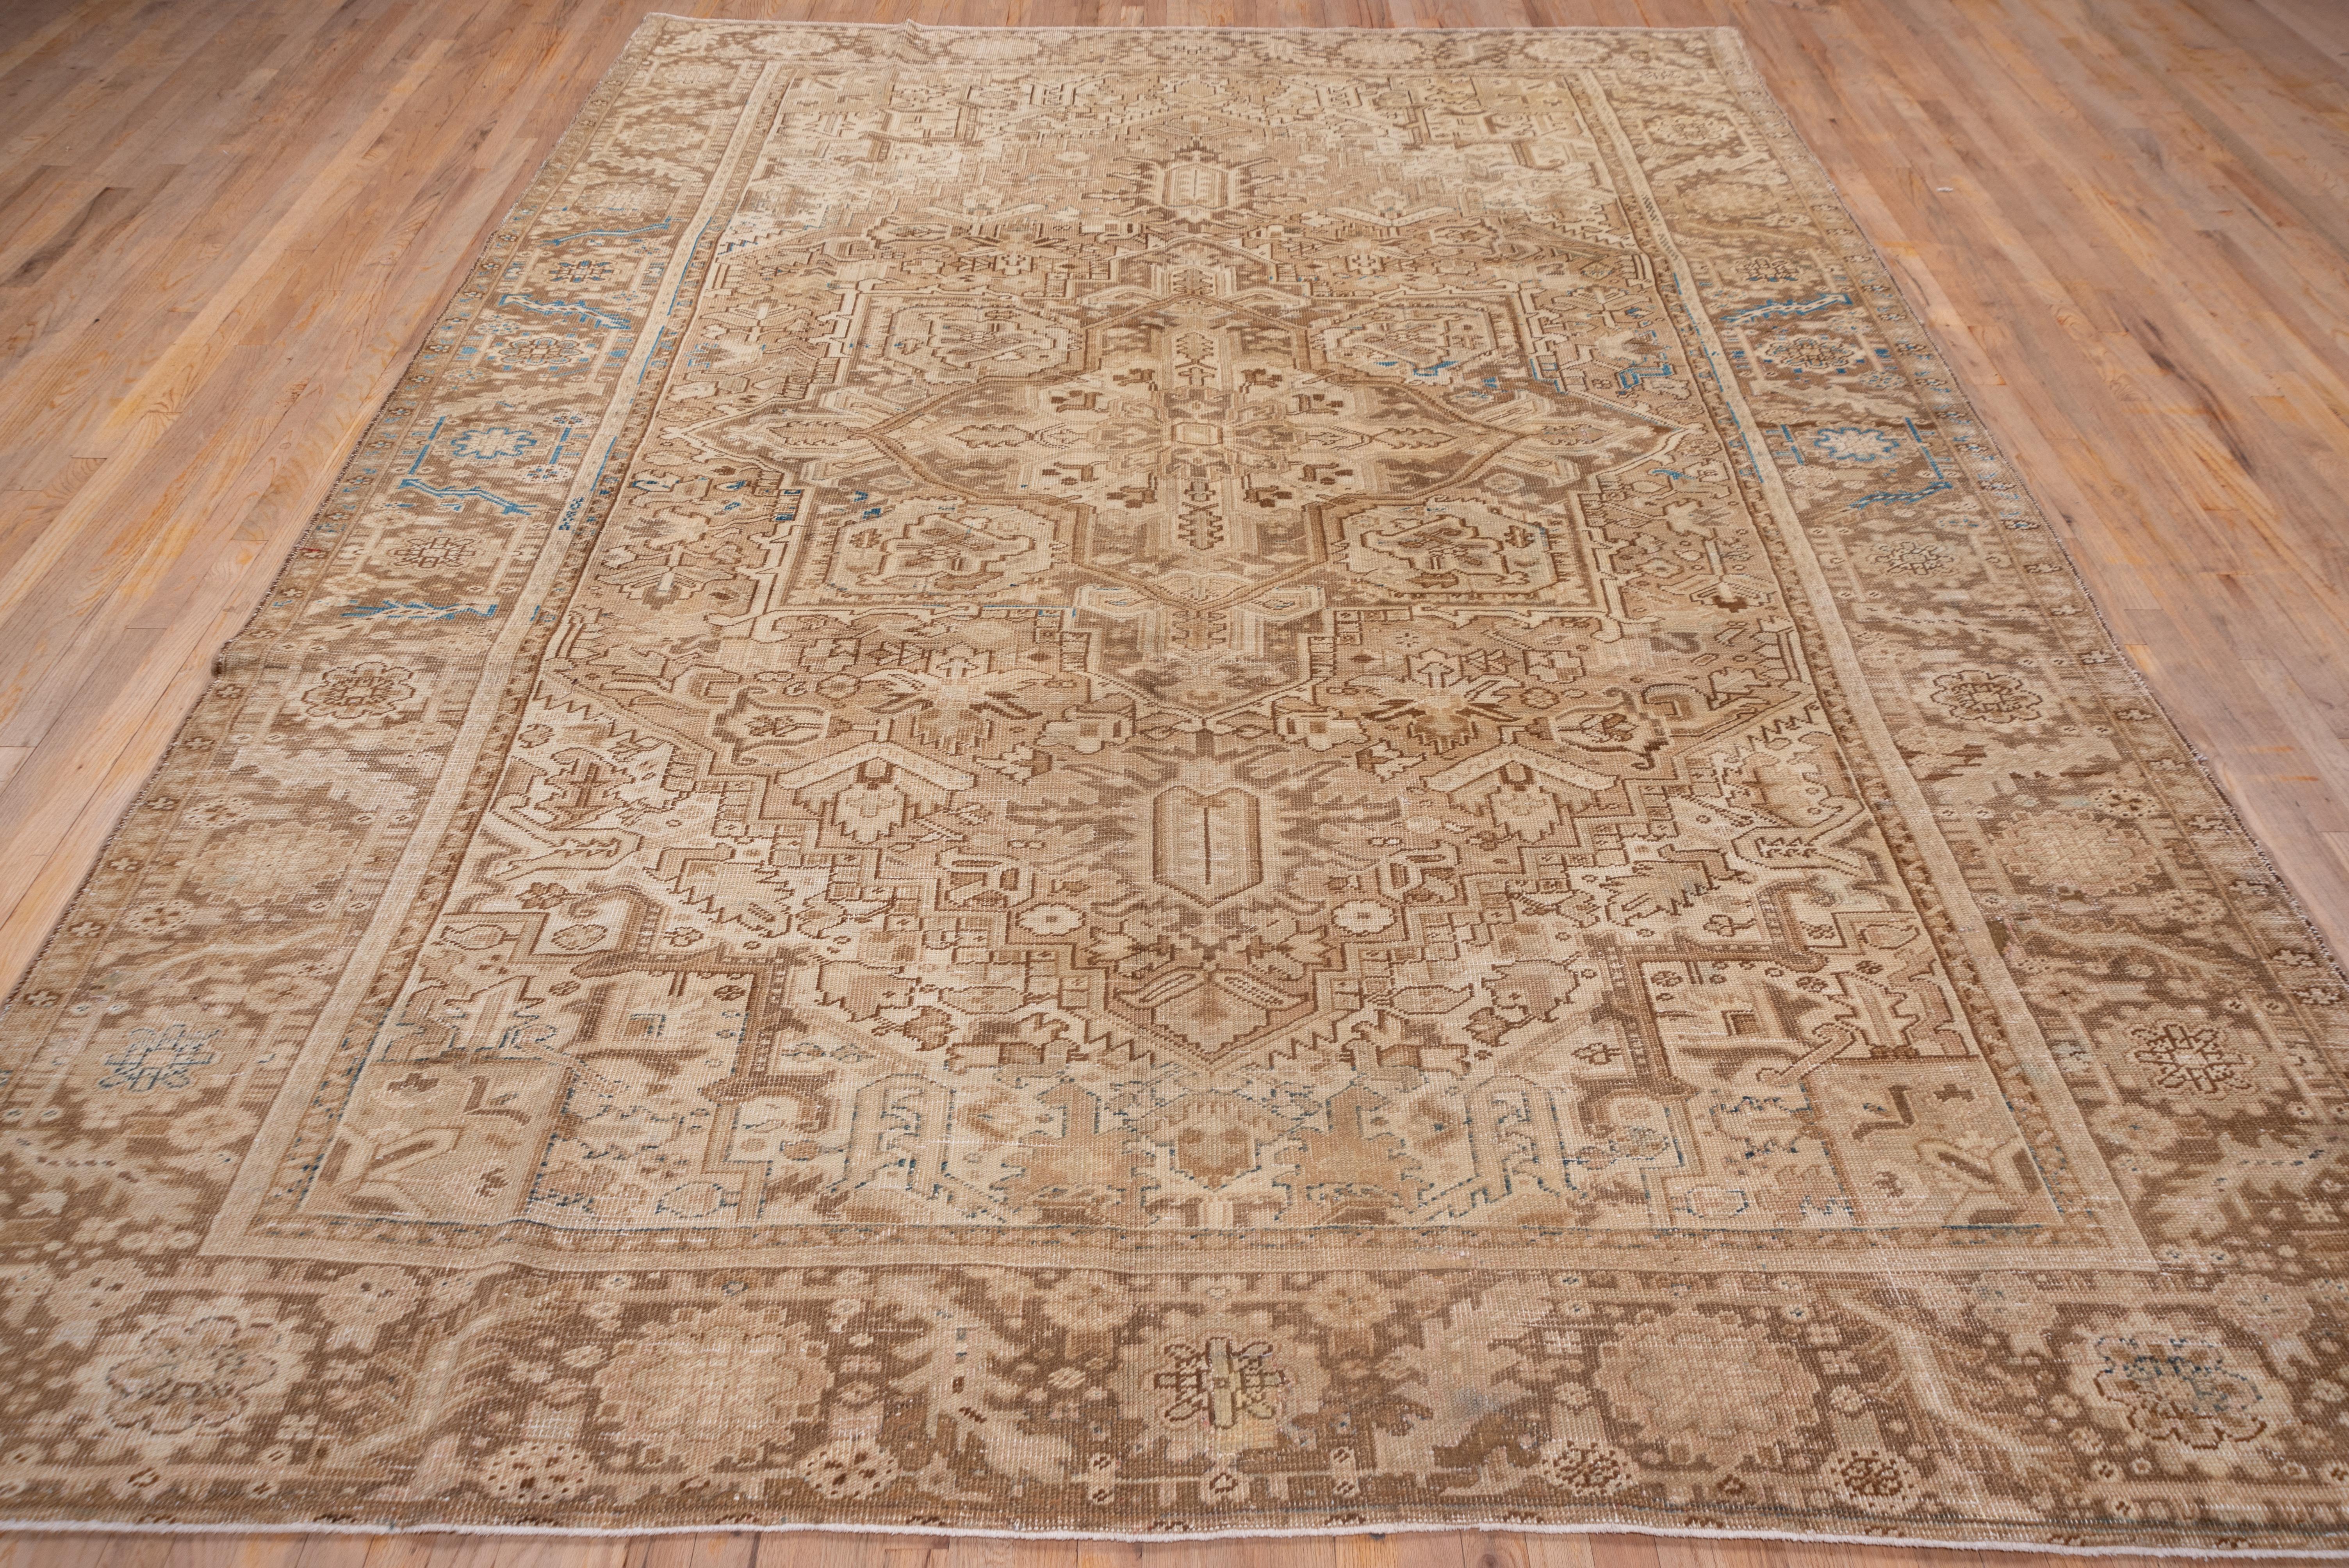 This lightly toned rustic NW Persian carpet features a palette of browns, buffs, cream and beige's, with a central octogramme medallion and cream triangular corners. The geometric drawing extends to the sienna brown border with a bent leaf and